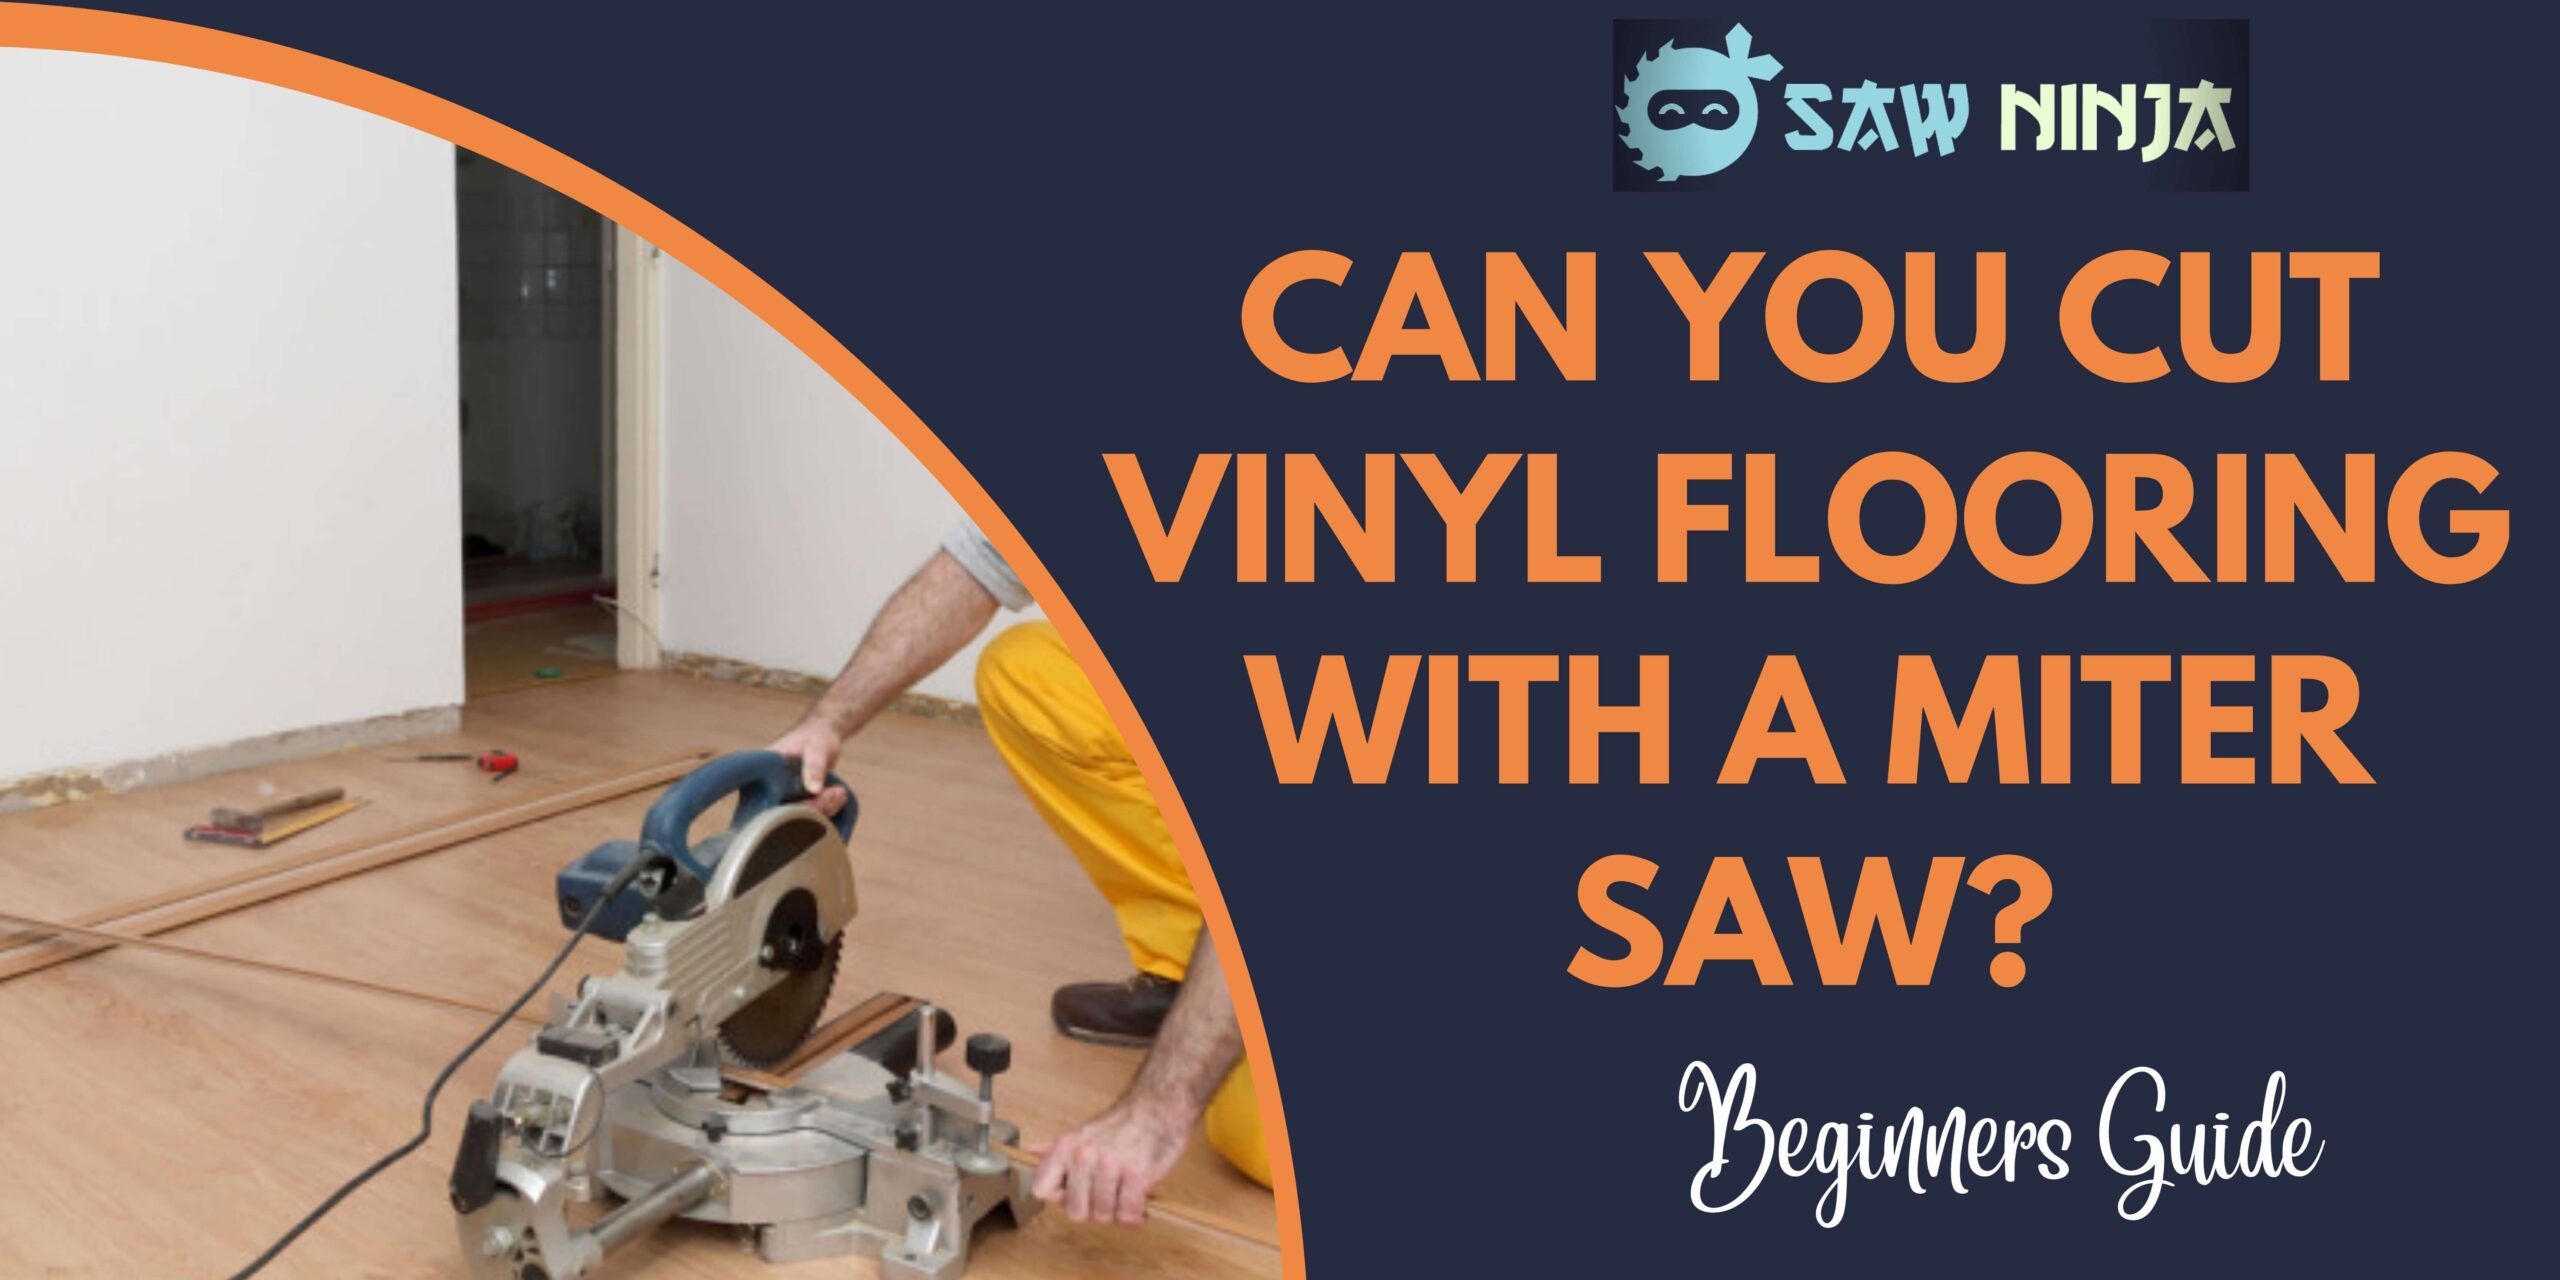 Can You Cut Vinyl Flooring With a Miter Saw